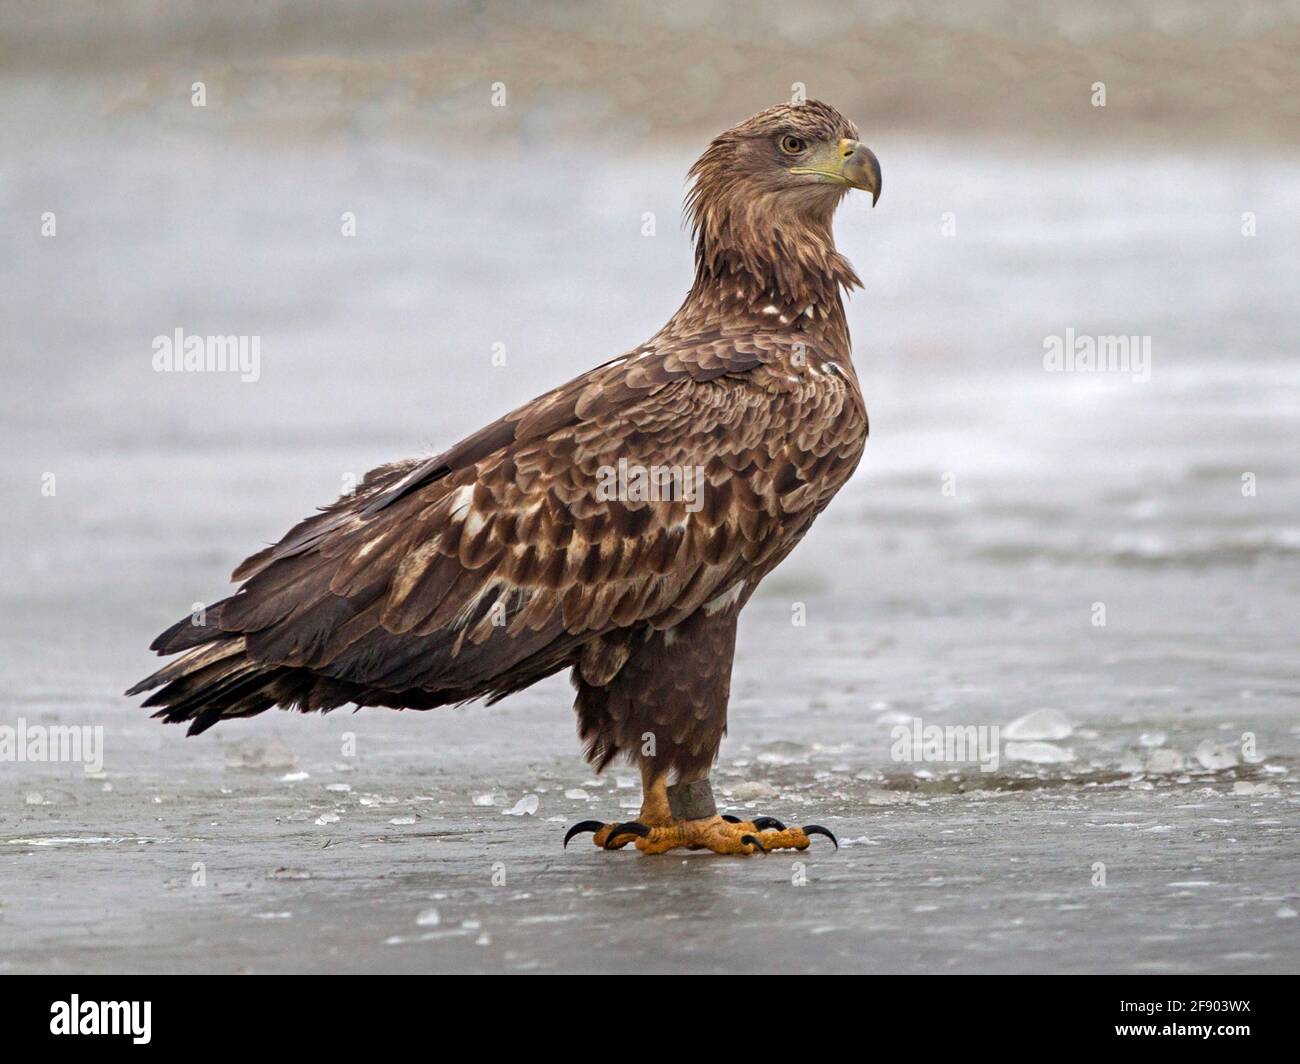 White-tailed eagle standing Stock Photo